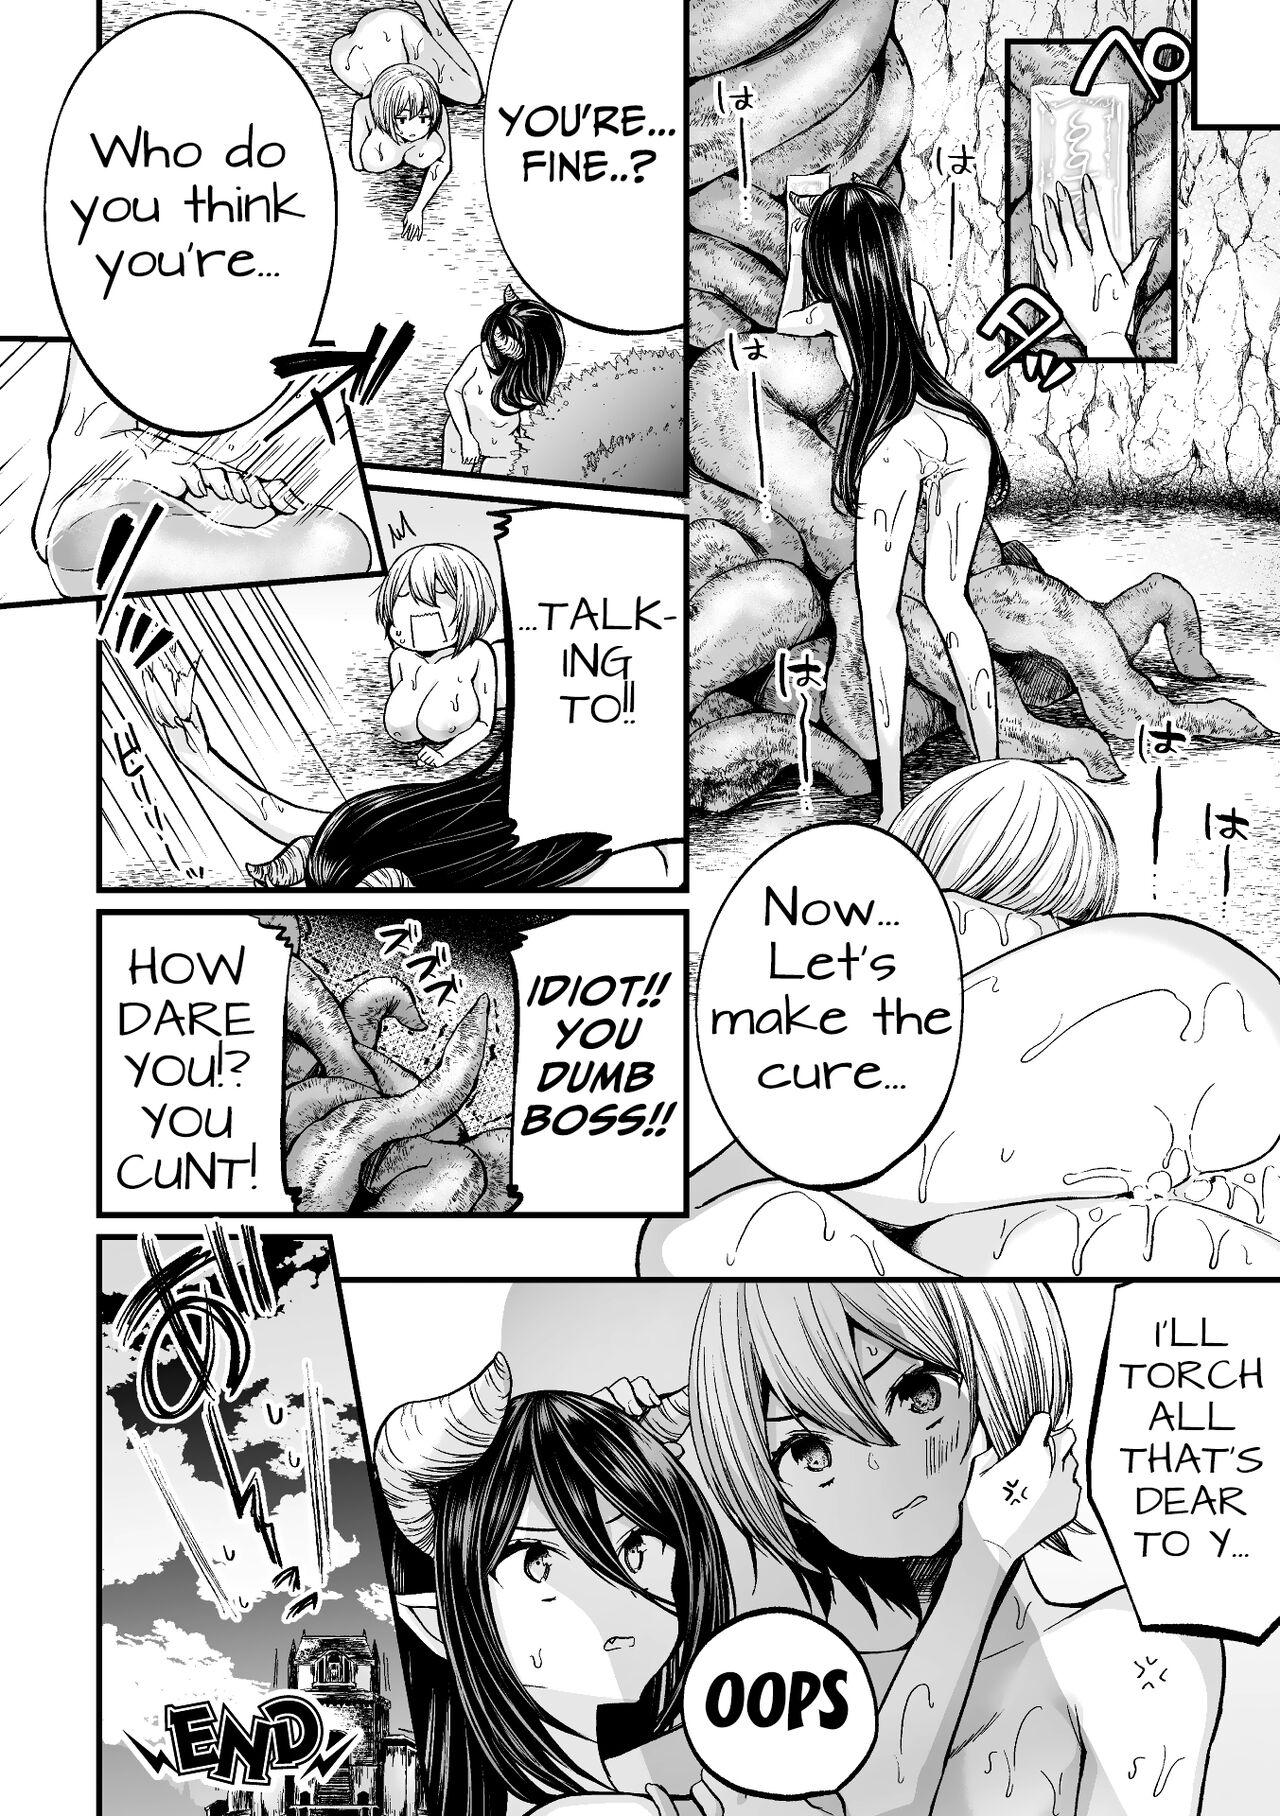 Oral Sex Gekinure! Namaiki TRAP | Rough TRAP in the Raw! - Ero trap dungeon Monster Dick - Page 16